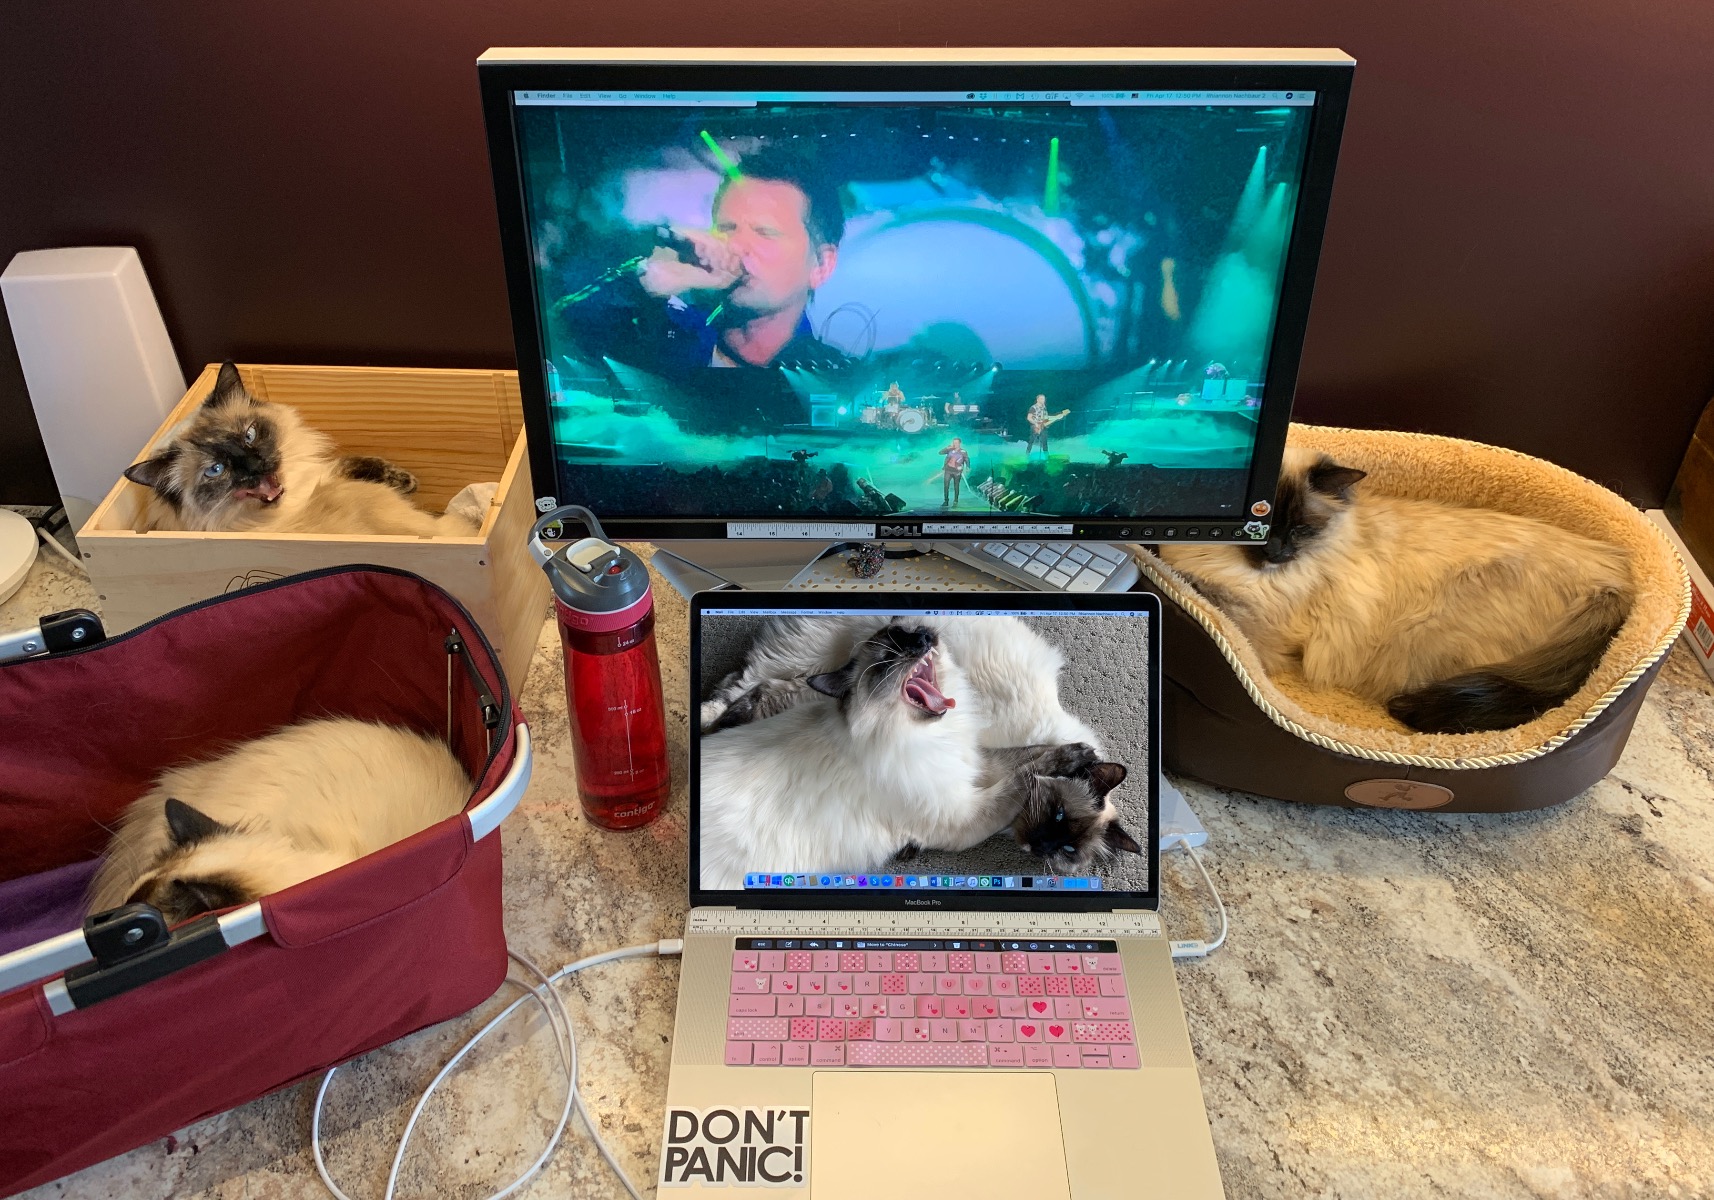 Three beautiful longhair siamese cats in various baskets beside a laptop and large computer monitor with the band Muse on the screen